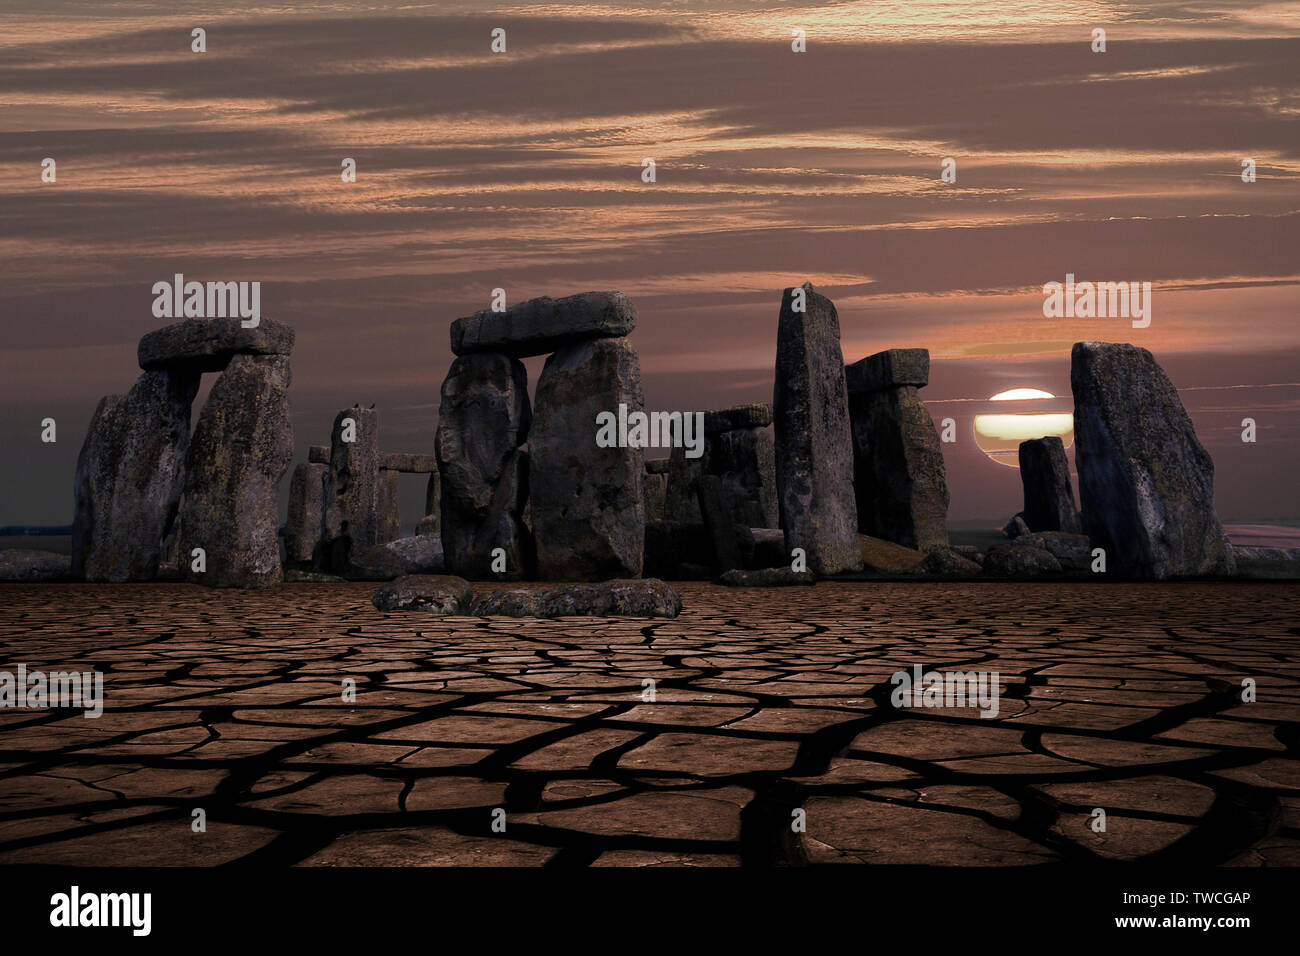 Stonehenge,ancient,attraction,Amesbury,Circle,calendar,stone,monument,archaelogical,site,archaeology,Britain,British,Wiltshire,A303,road,project, Stock Photo